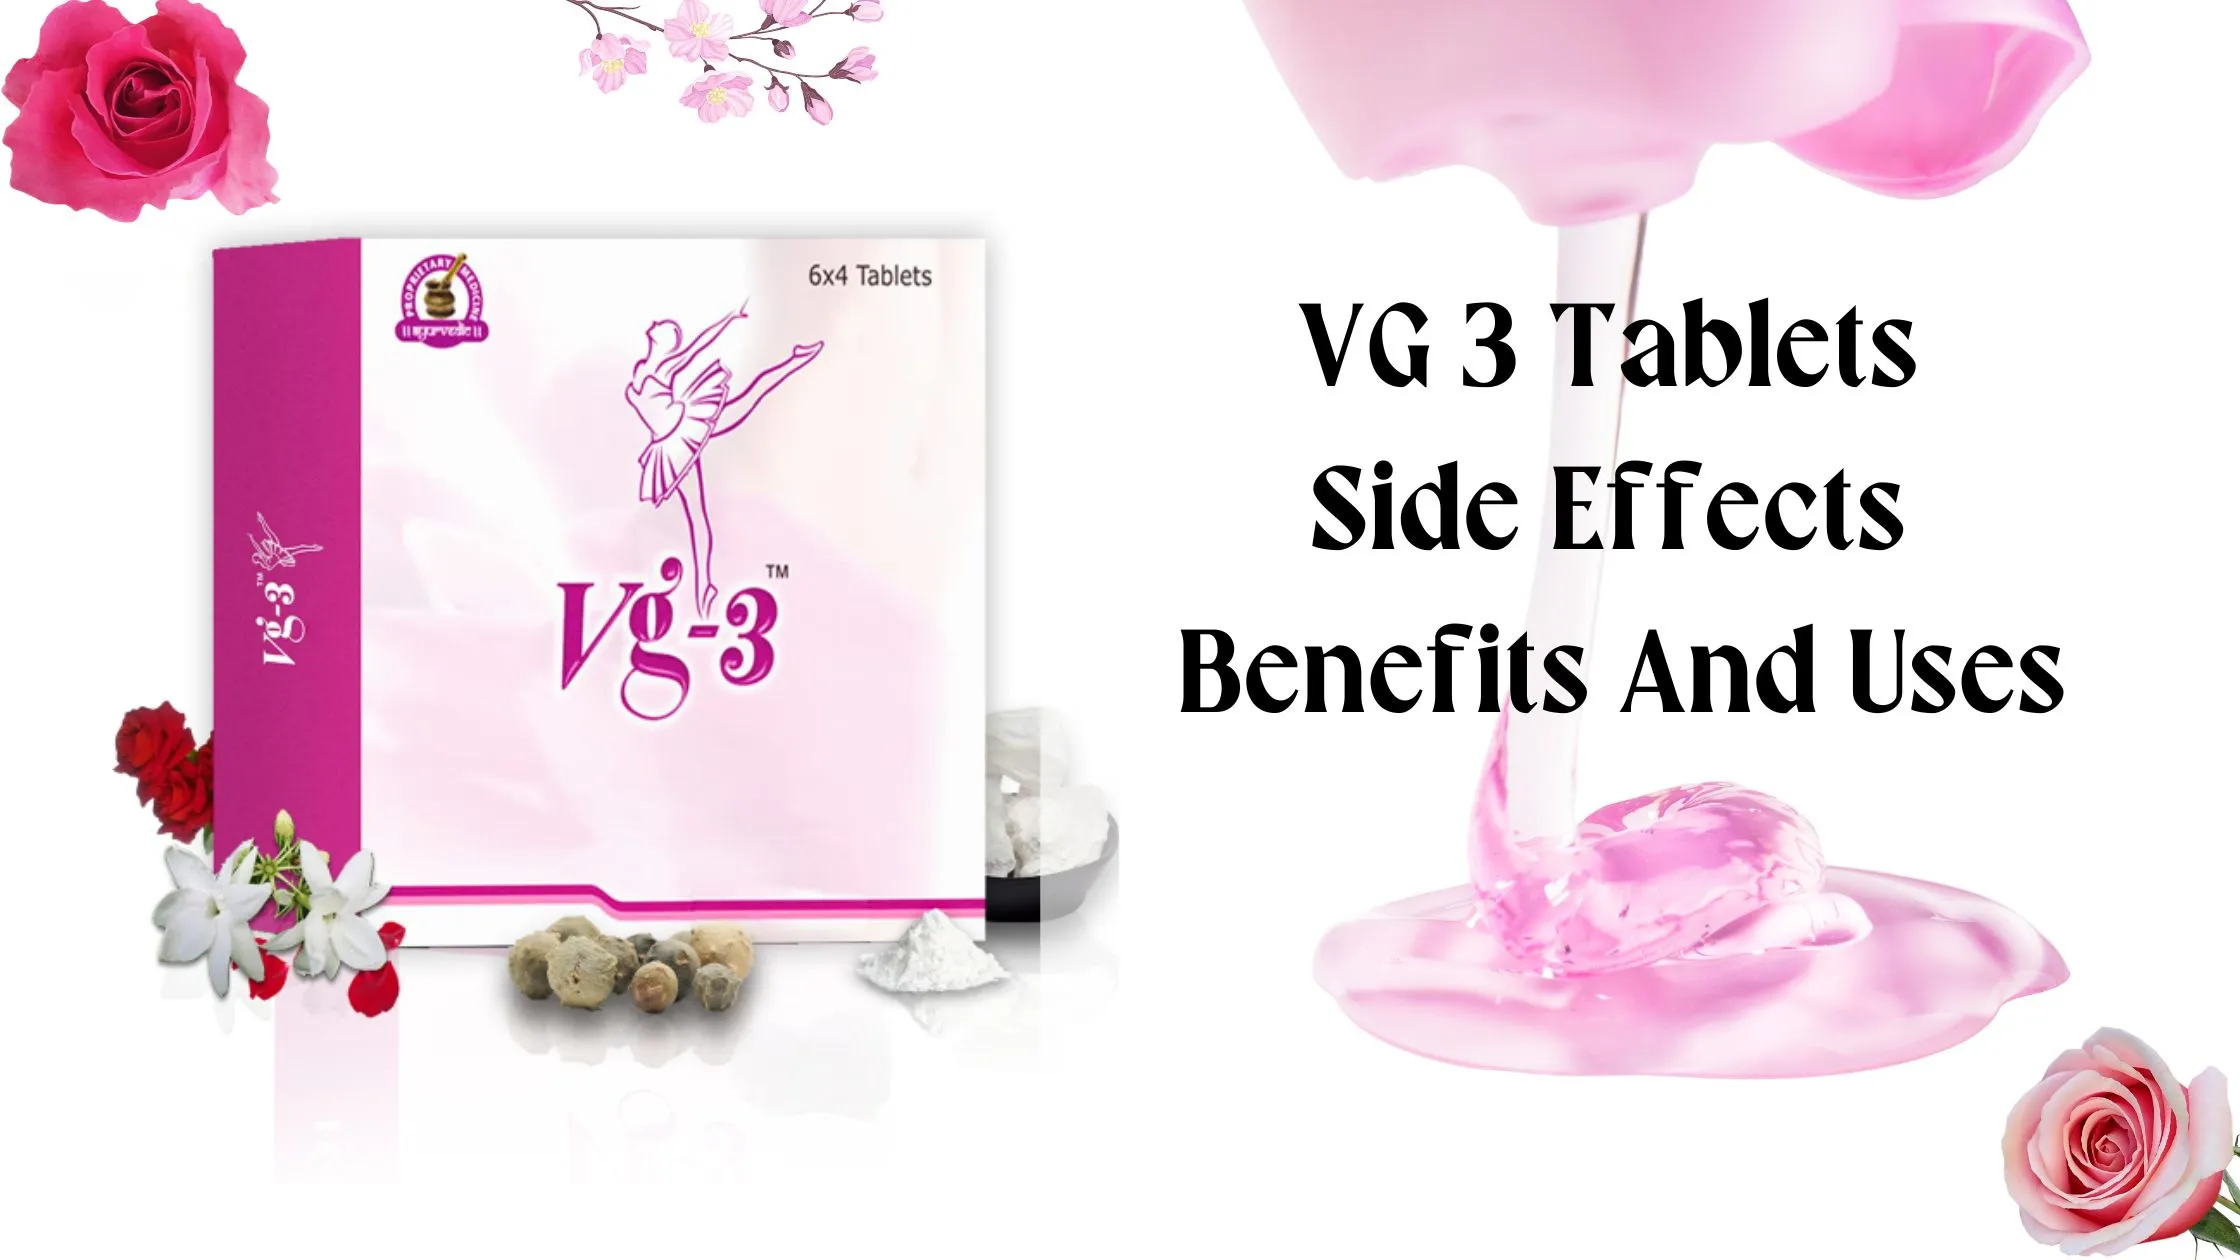 VG 3 Tablets Side Effects Benefits And Uses